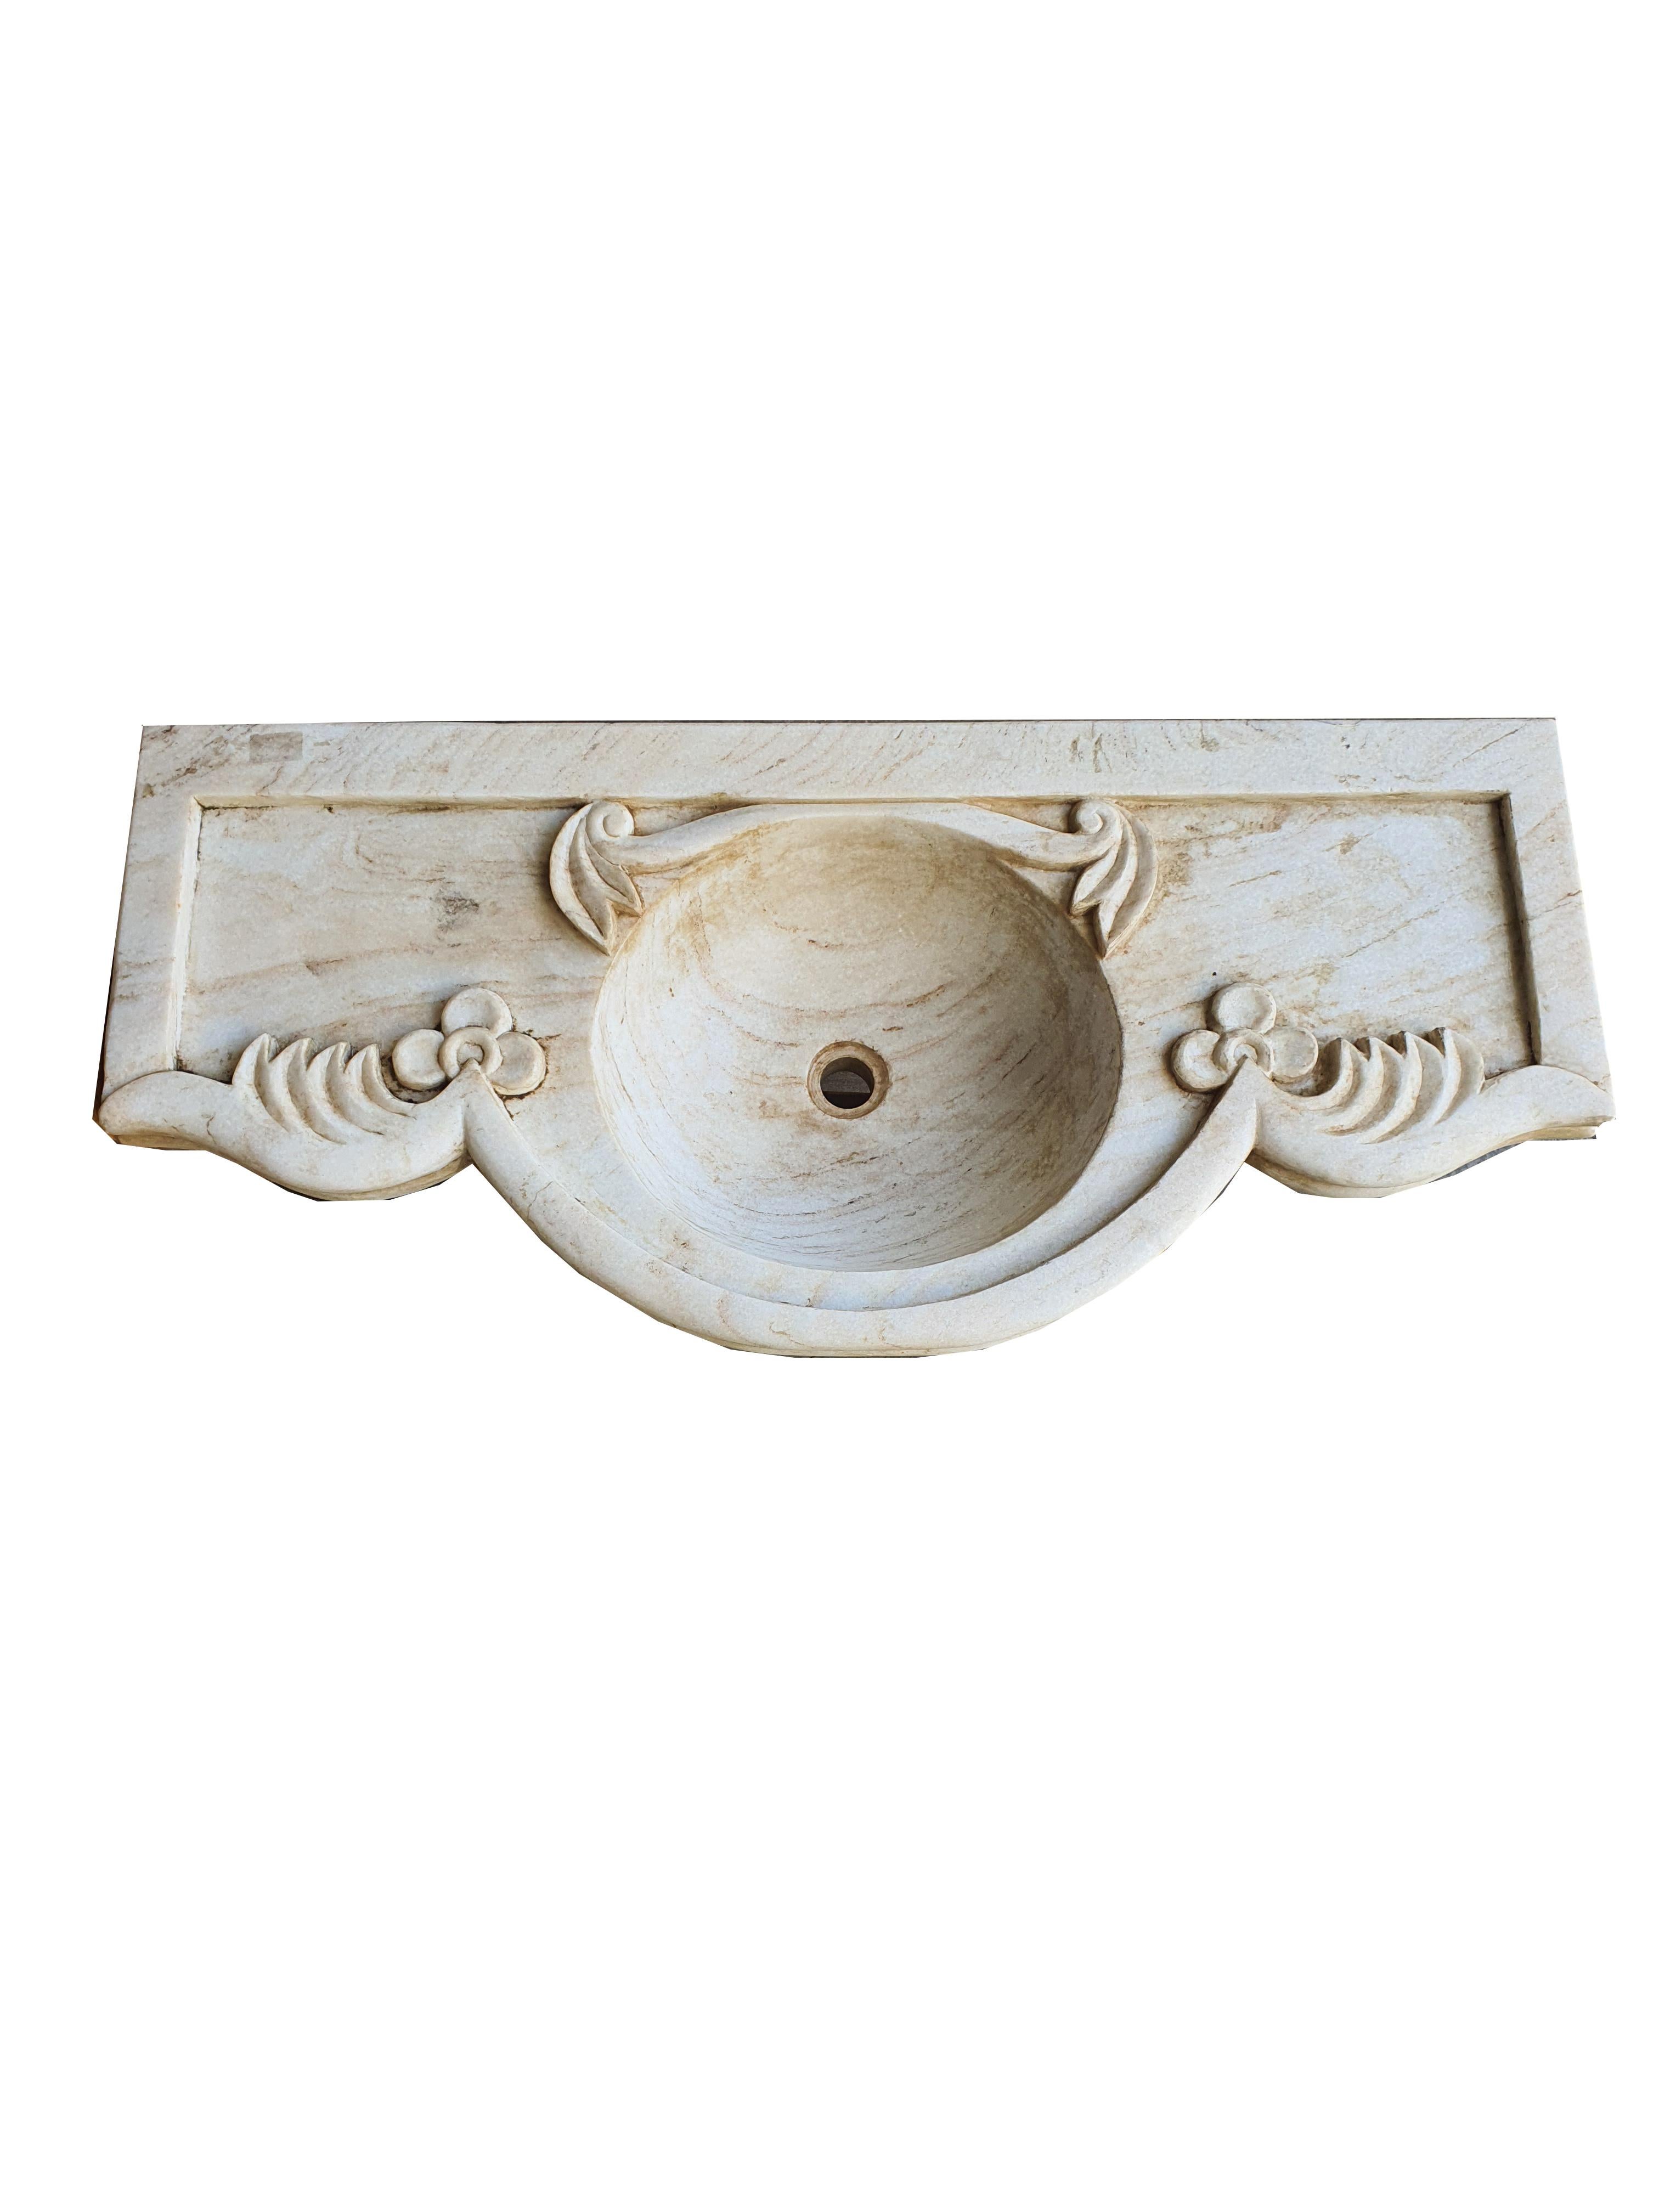 Italian 19th Century Pair of Classical Carved Marble Stone Sink Basin